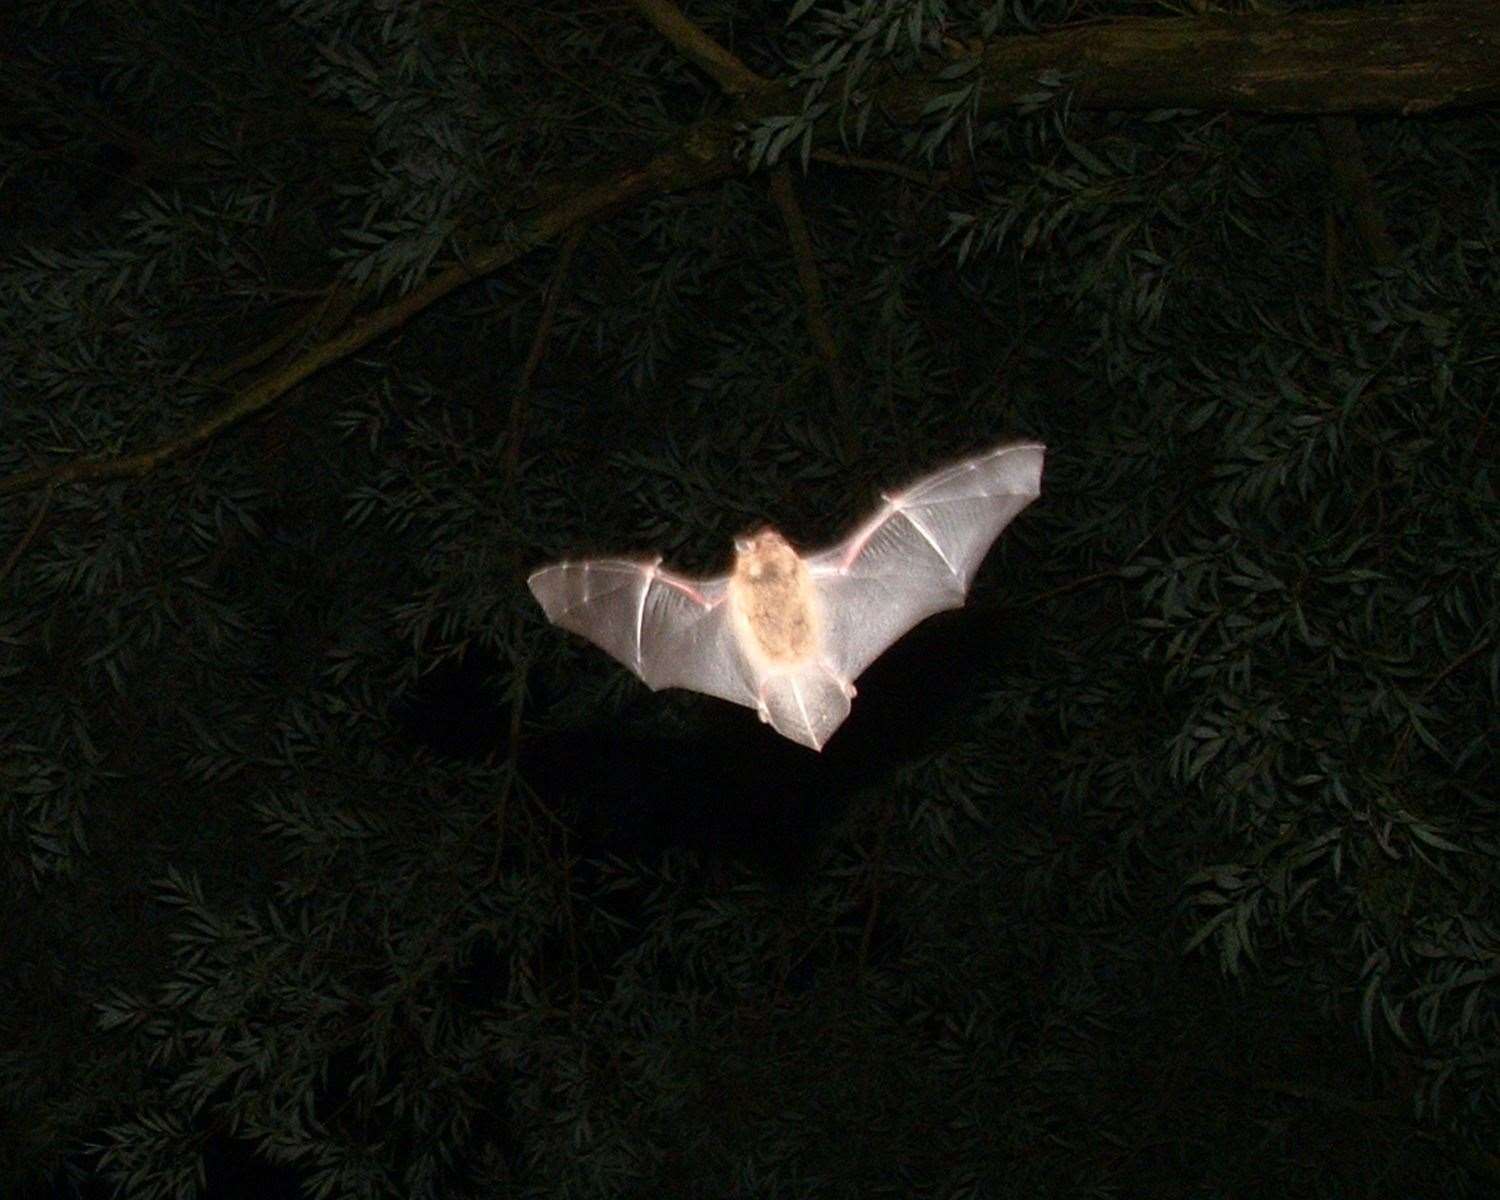 Pipistrelle bats have been reported at the site in recent years